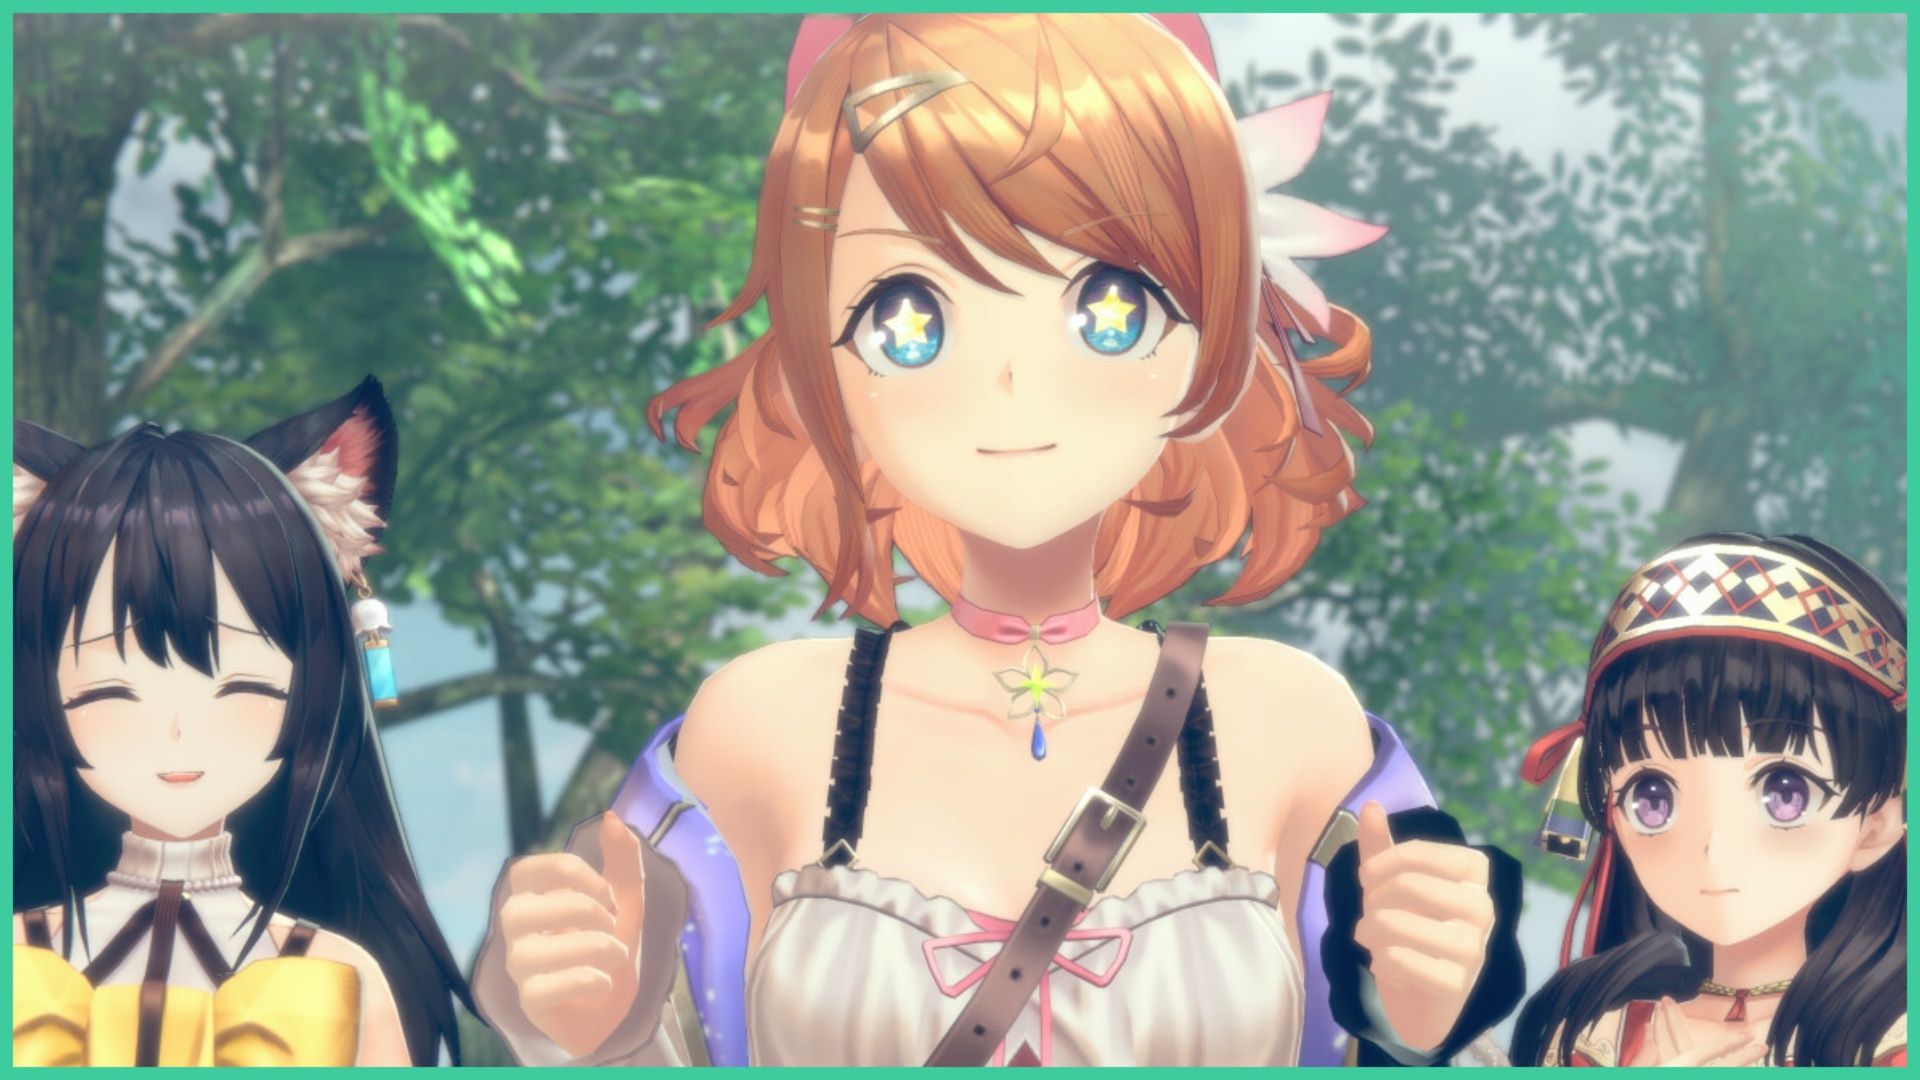 feature image for our atelier resleriana reroll guide, the image features a screenshot from the game of resna alongside two other female characters, resna looks excited with a sparkle in her eyes as she holds her fists up, the character on the left is smiling and the character on the right looks a little worried, there are trees behind them all